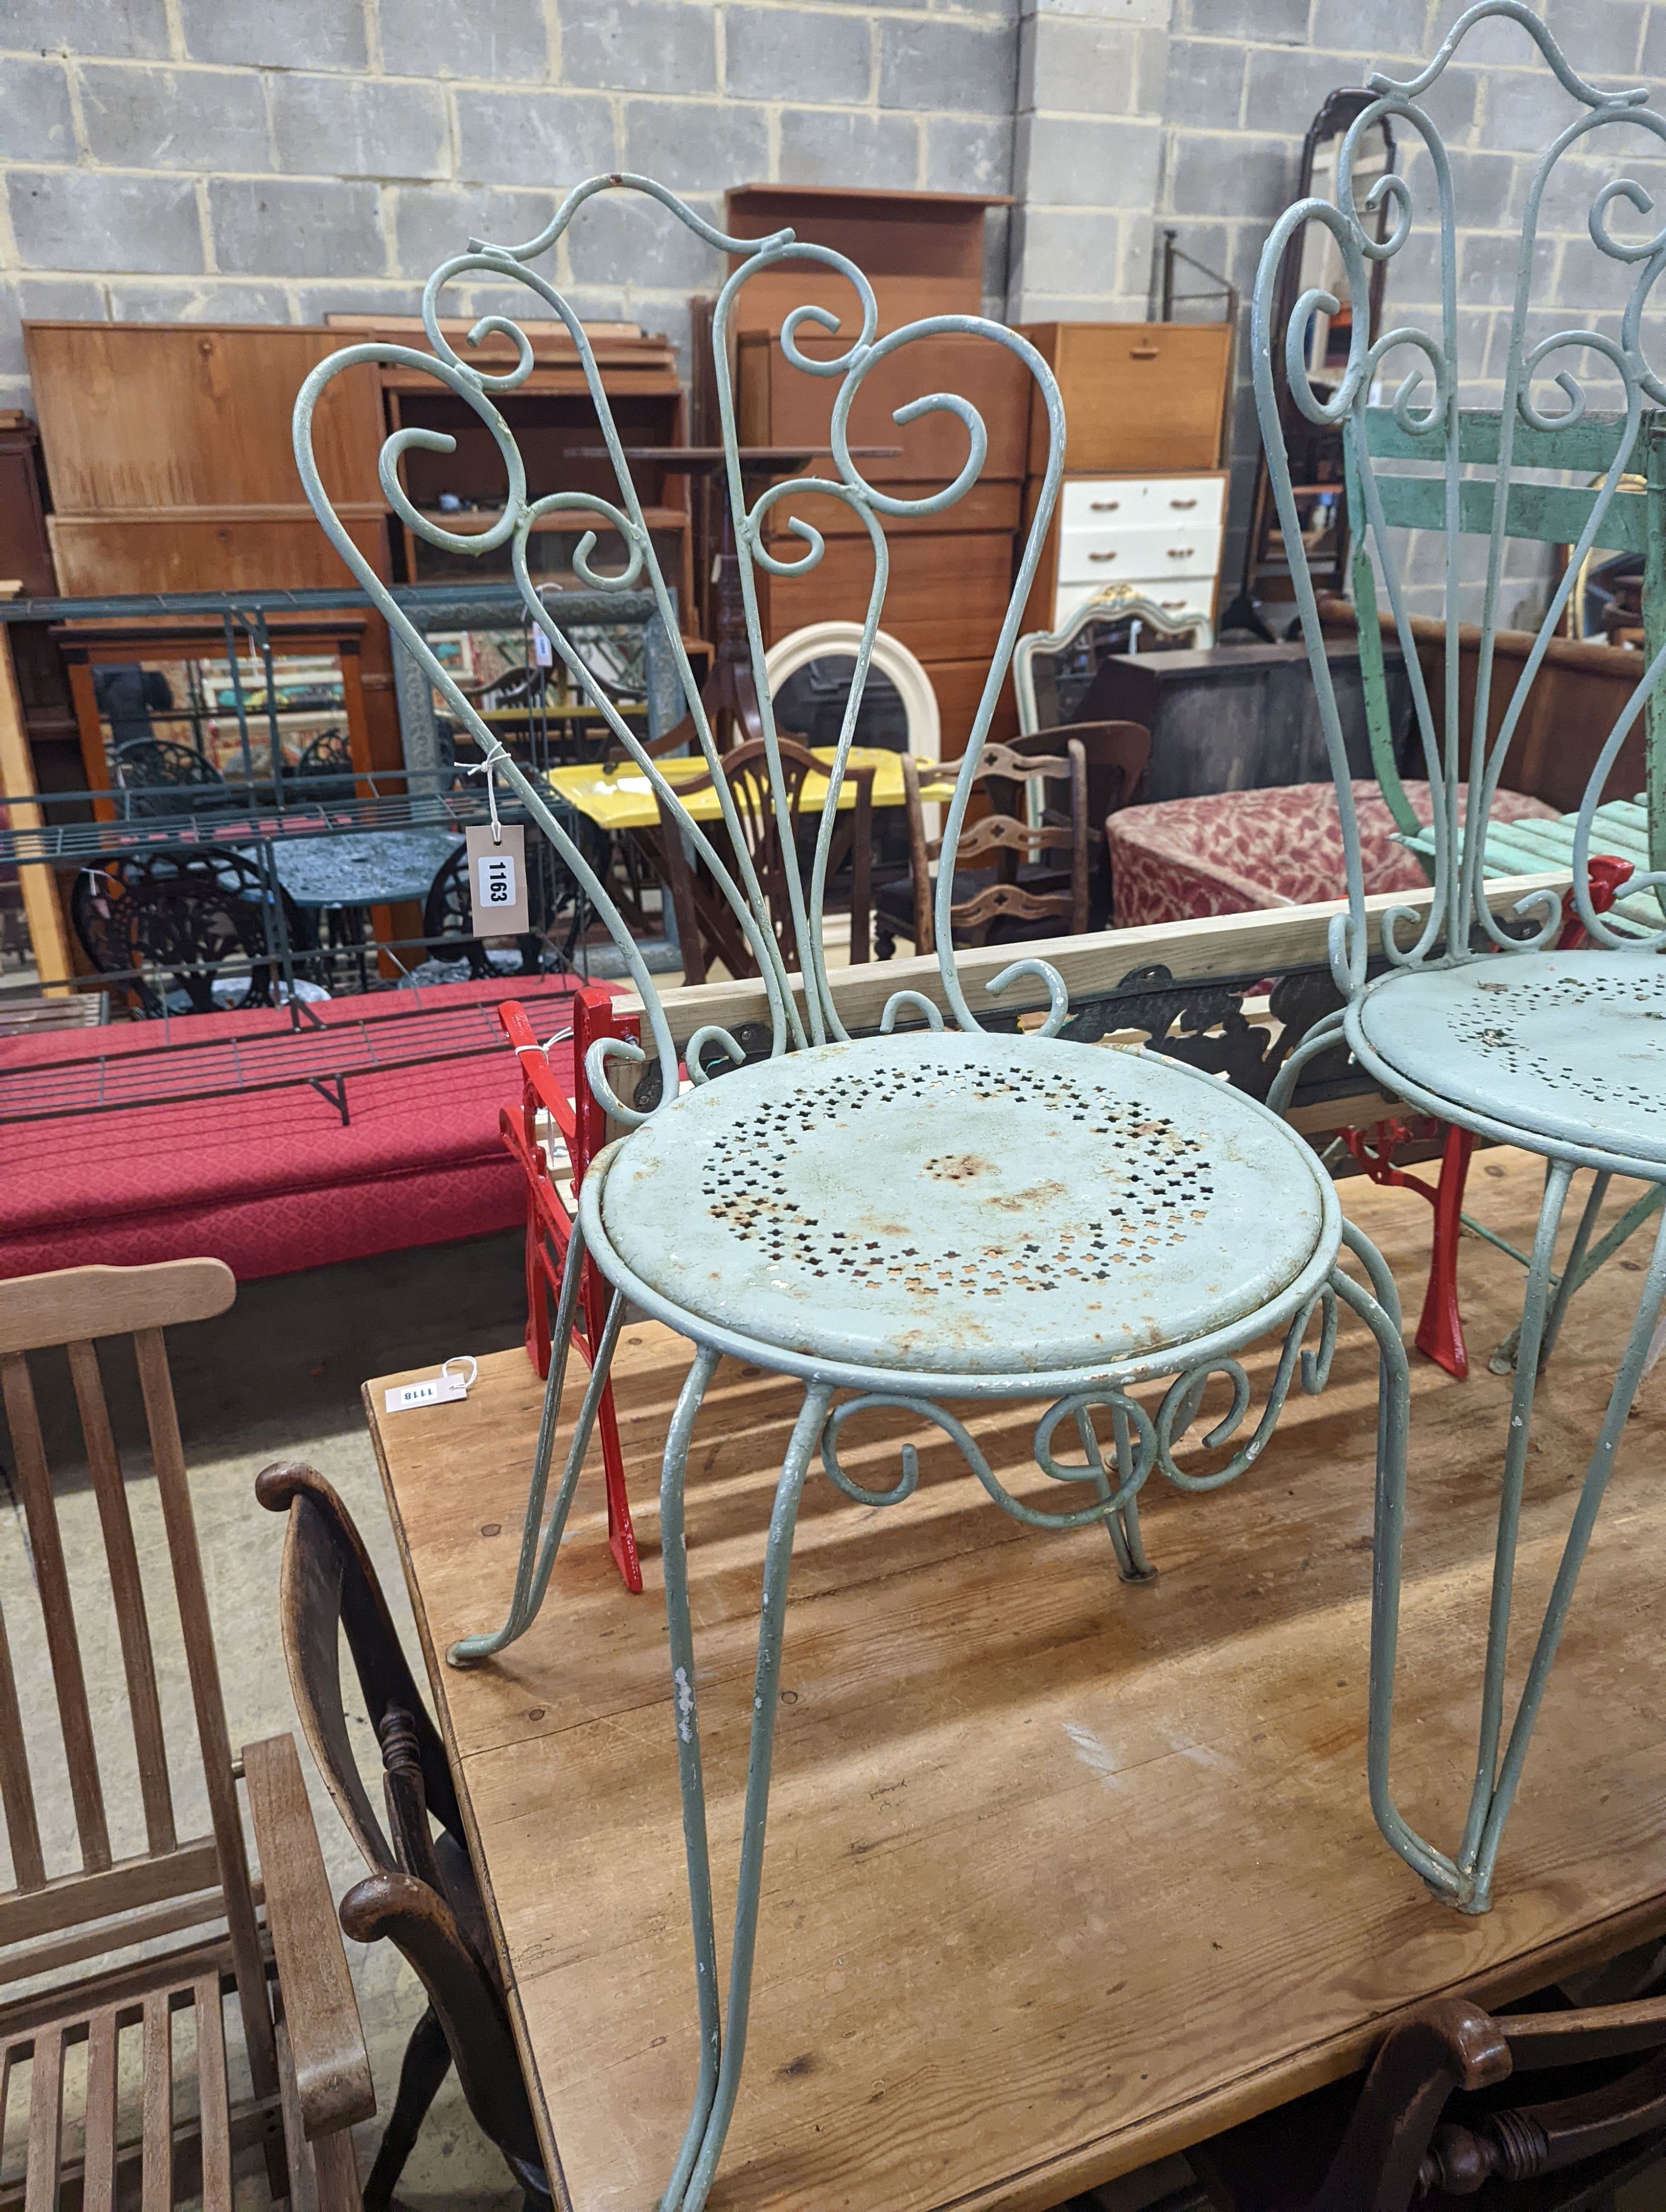 Six painted metal garden chairs